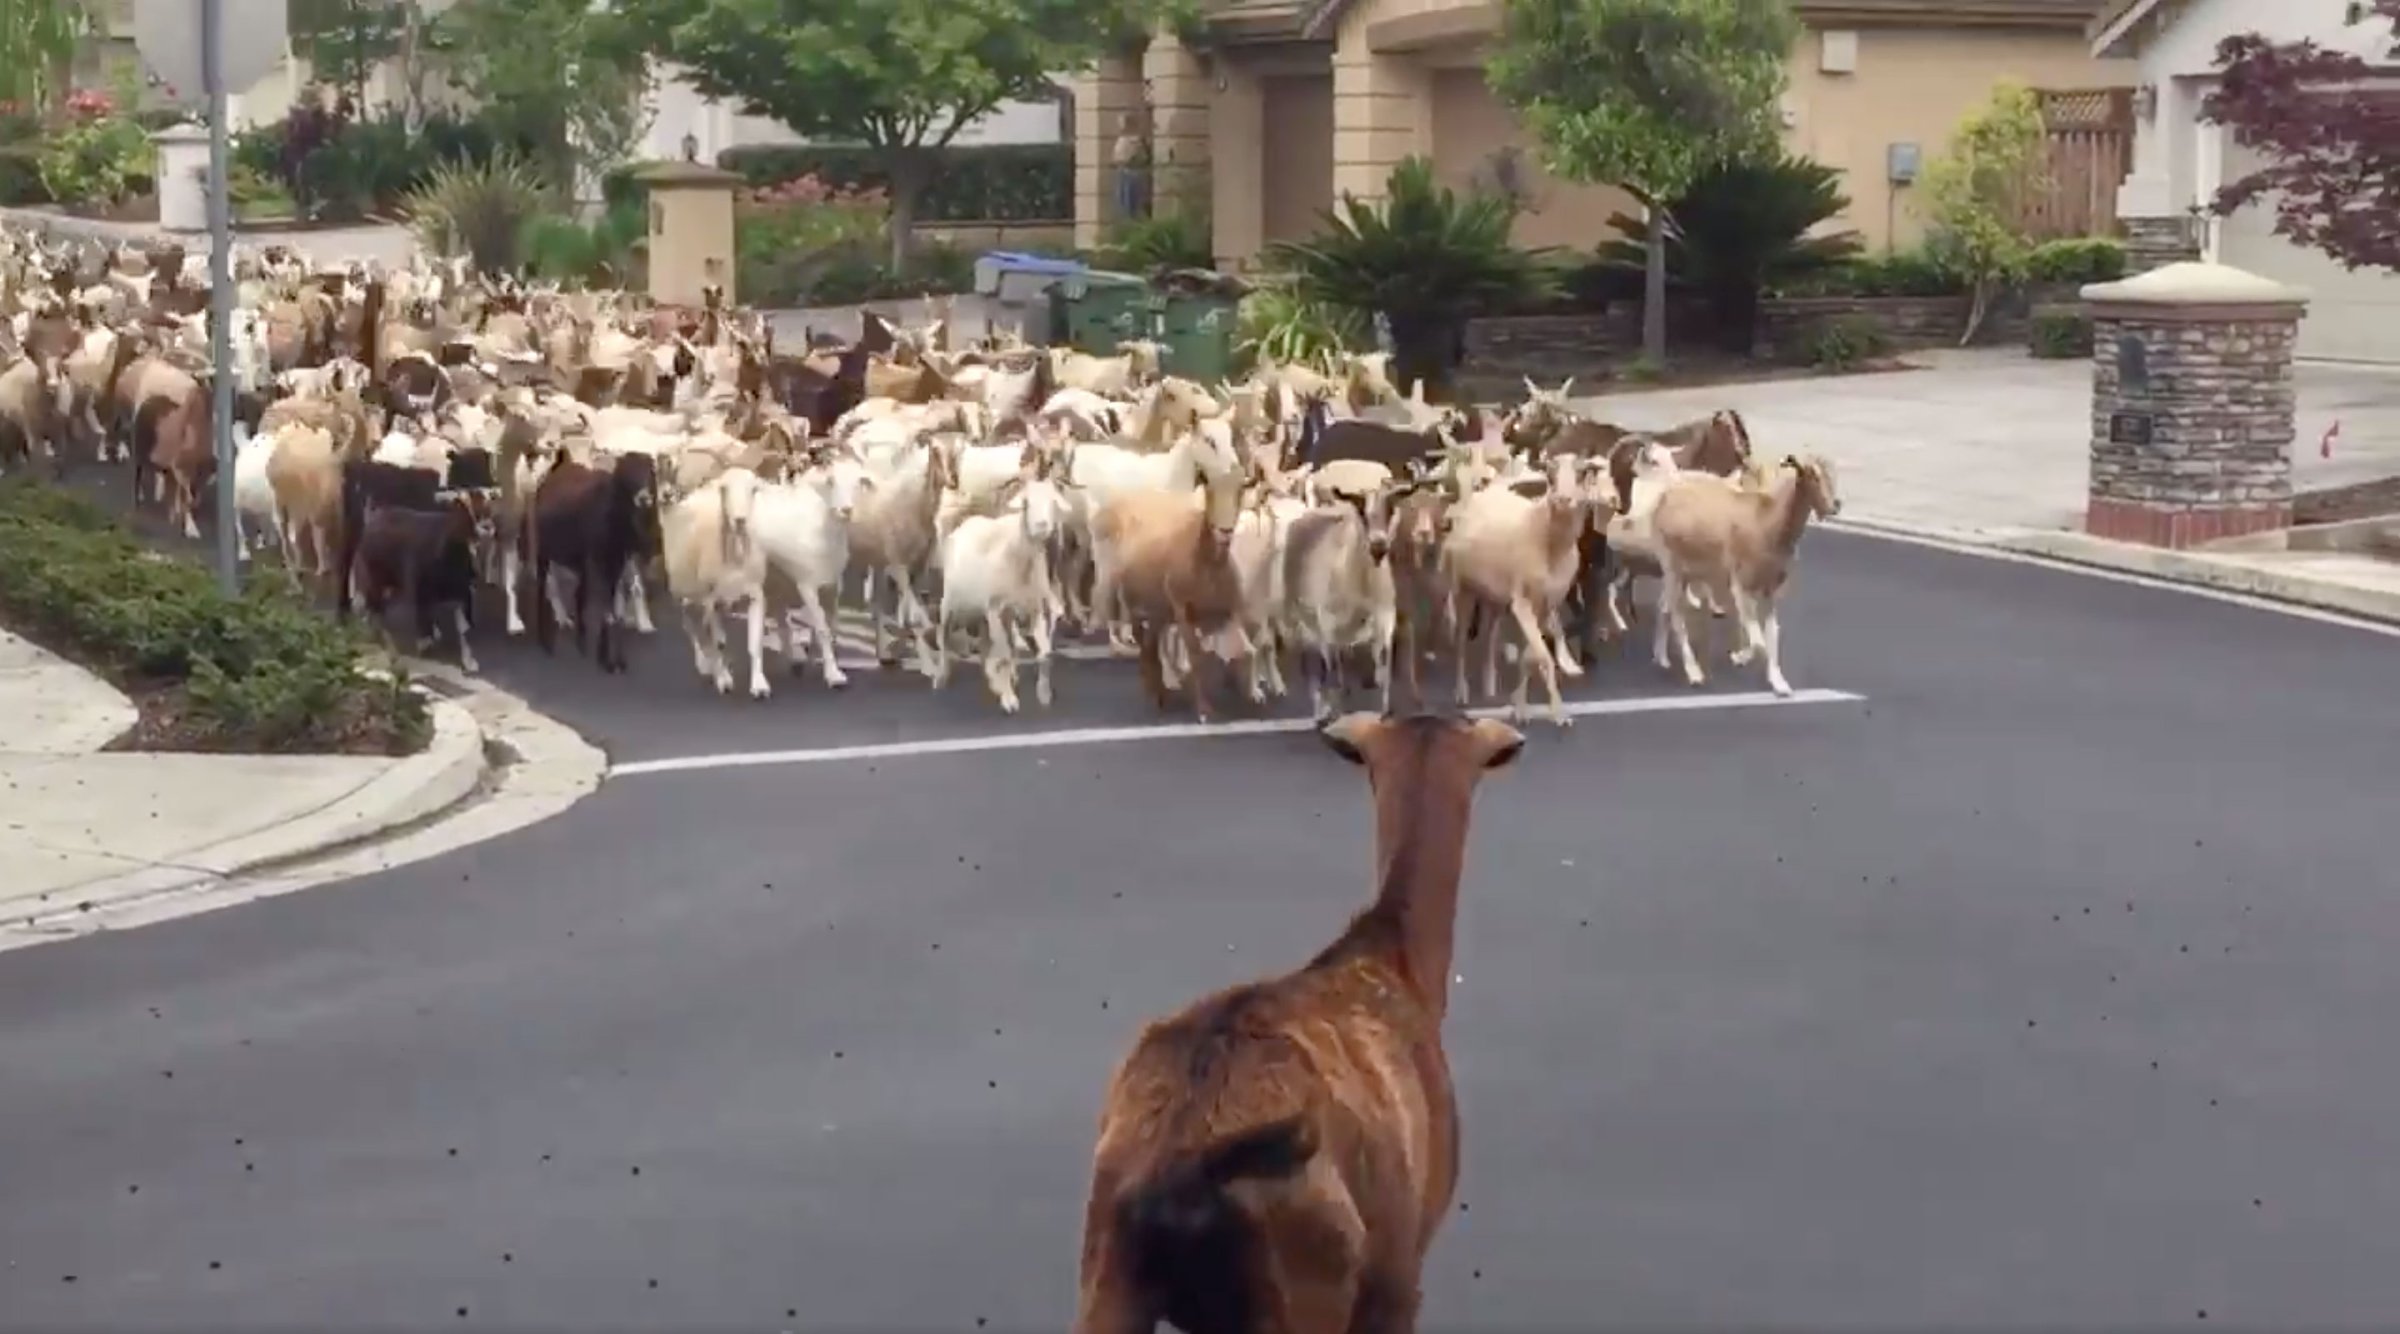 A still from a video posted to twitter of goats filling a neighborhood street